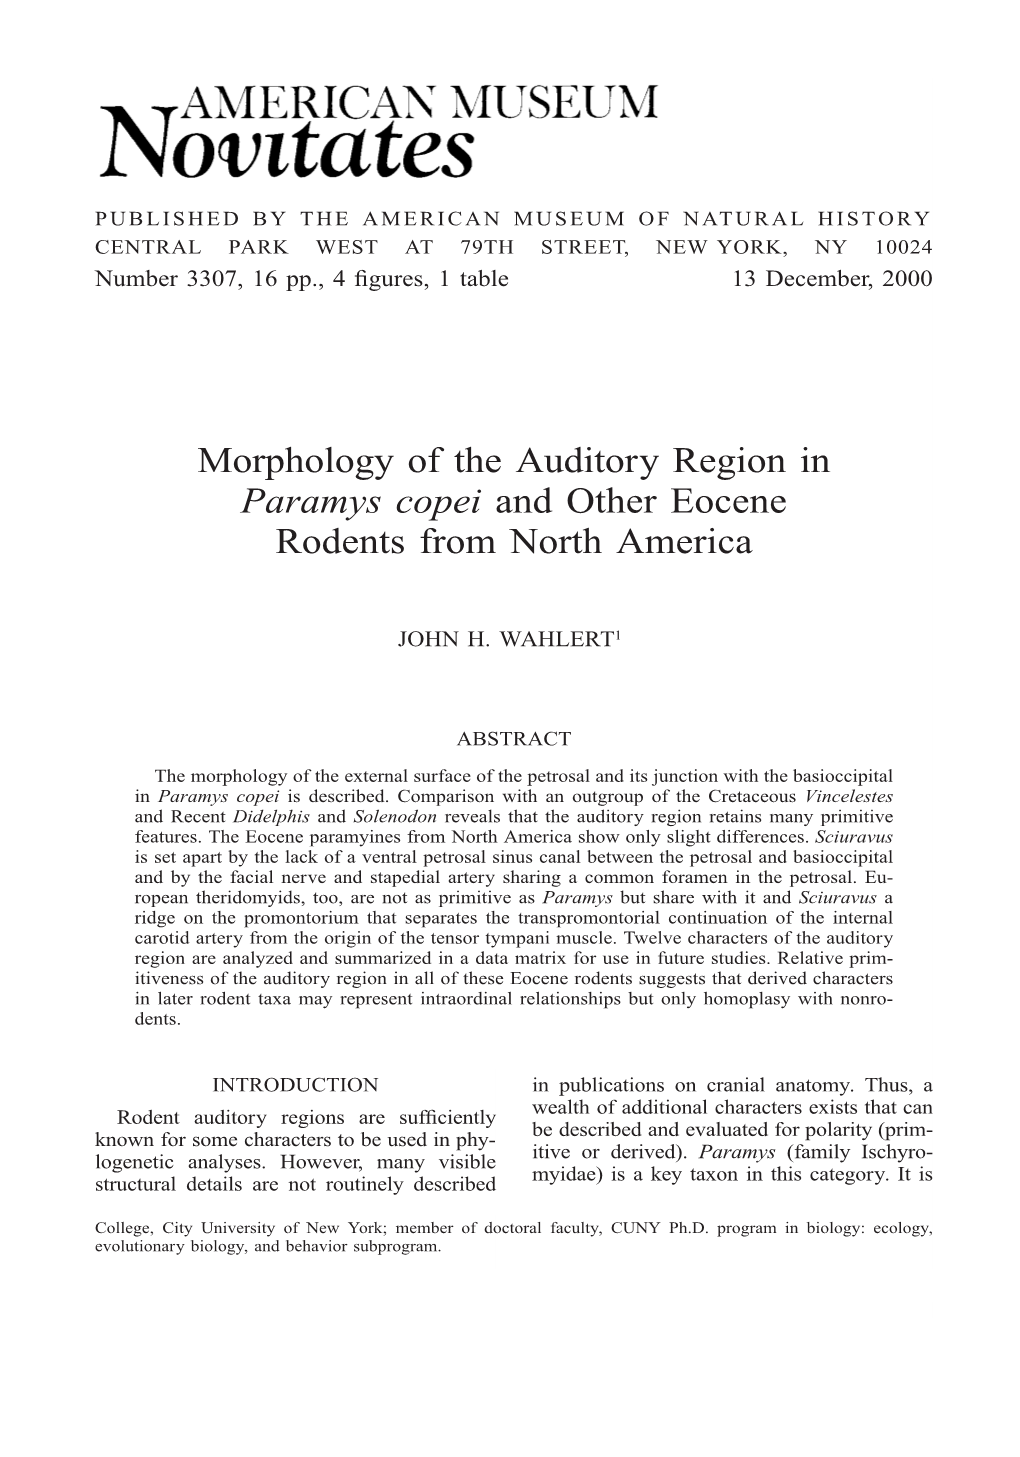 Morphology of the Auditory Region in Paramys Copei and Other Eocene Rodents from North America